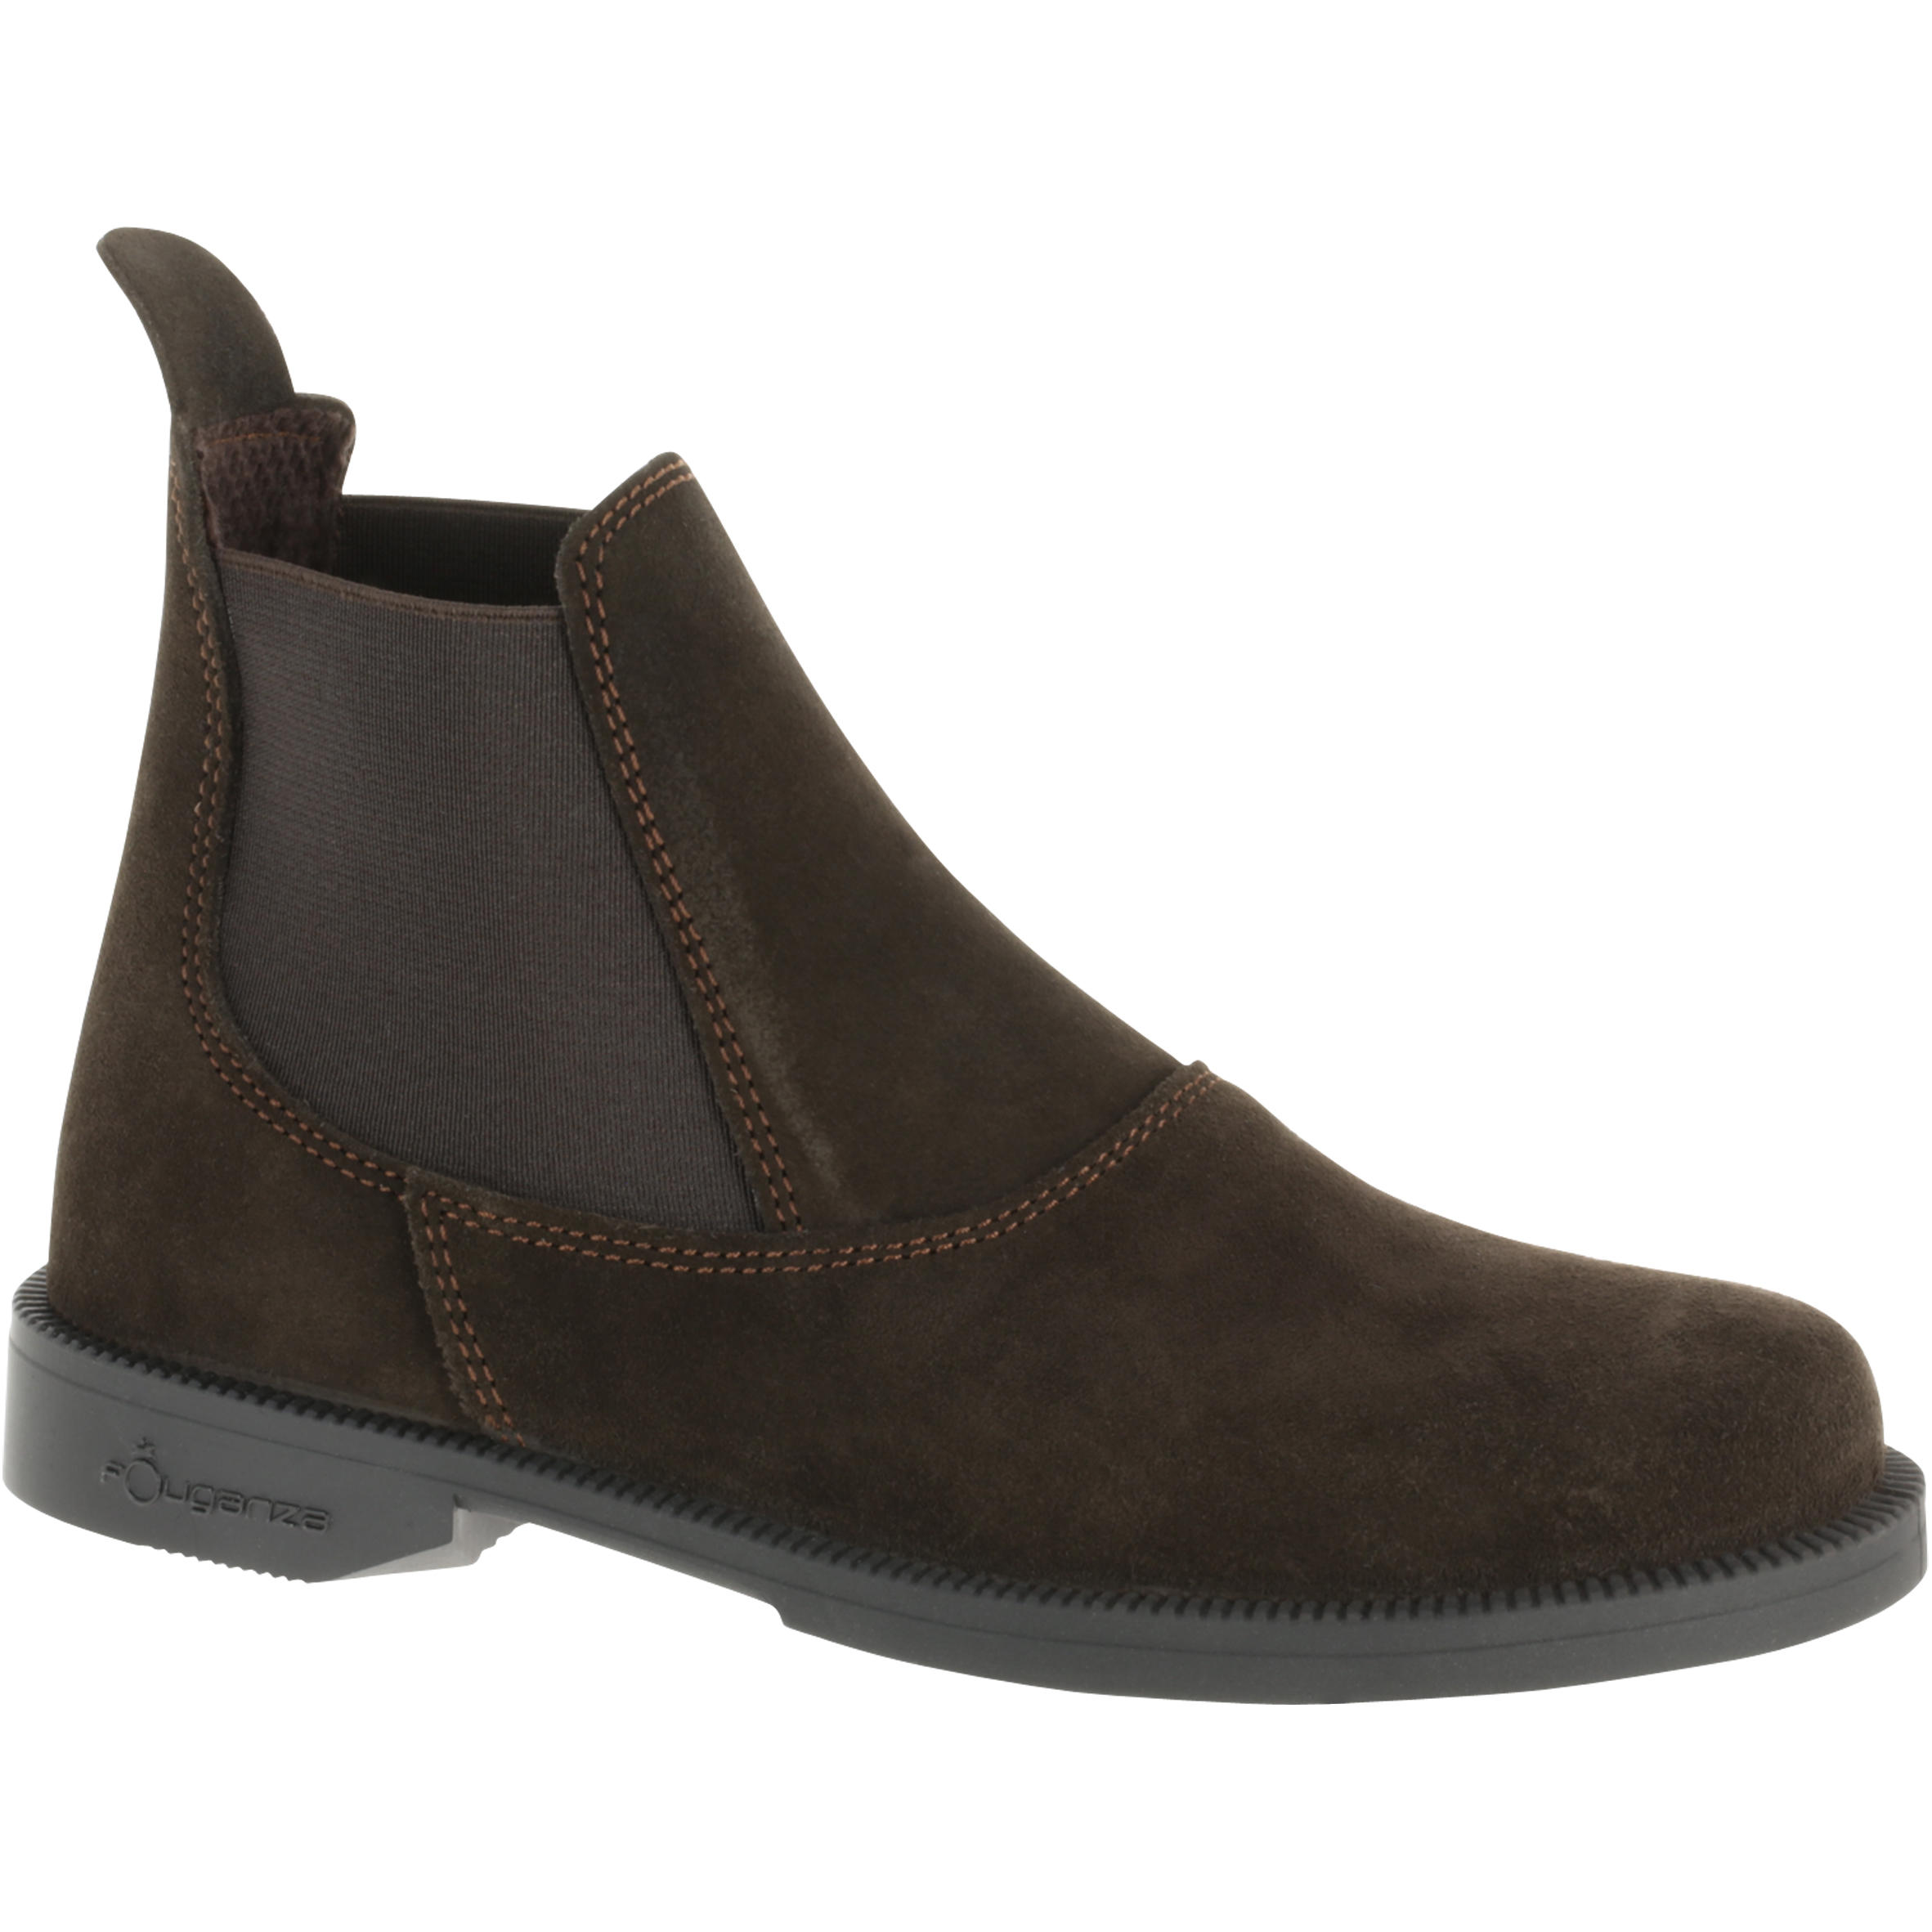 Kids' Horse Riding Leather Jodhpur Boots Classic - Brown 1/13